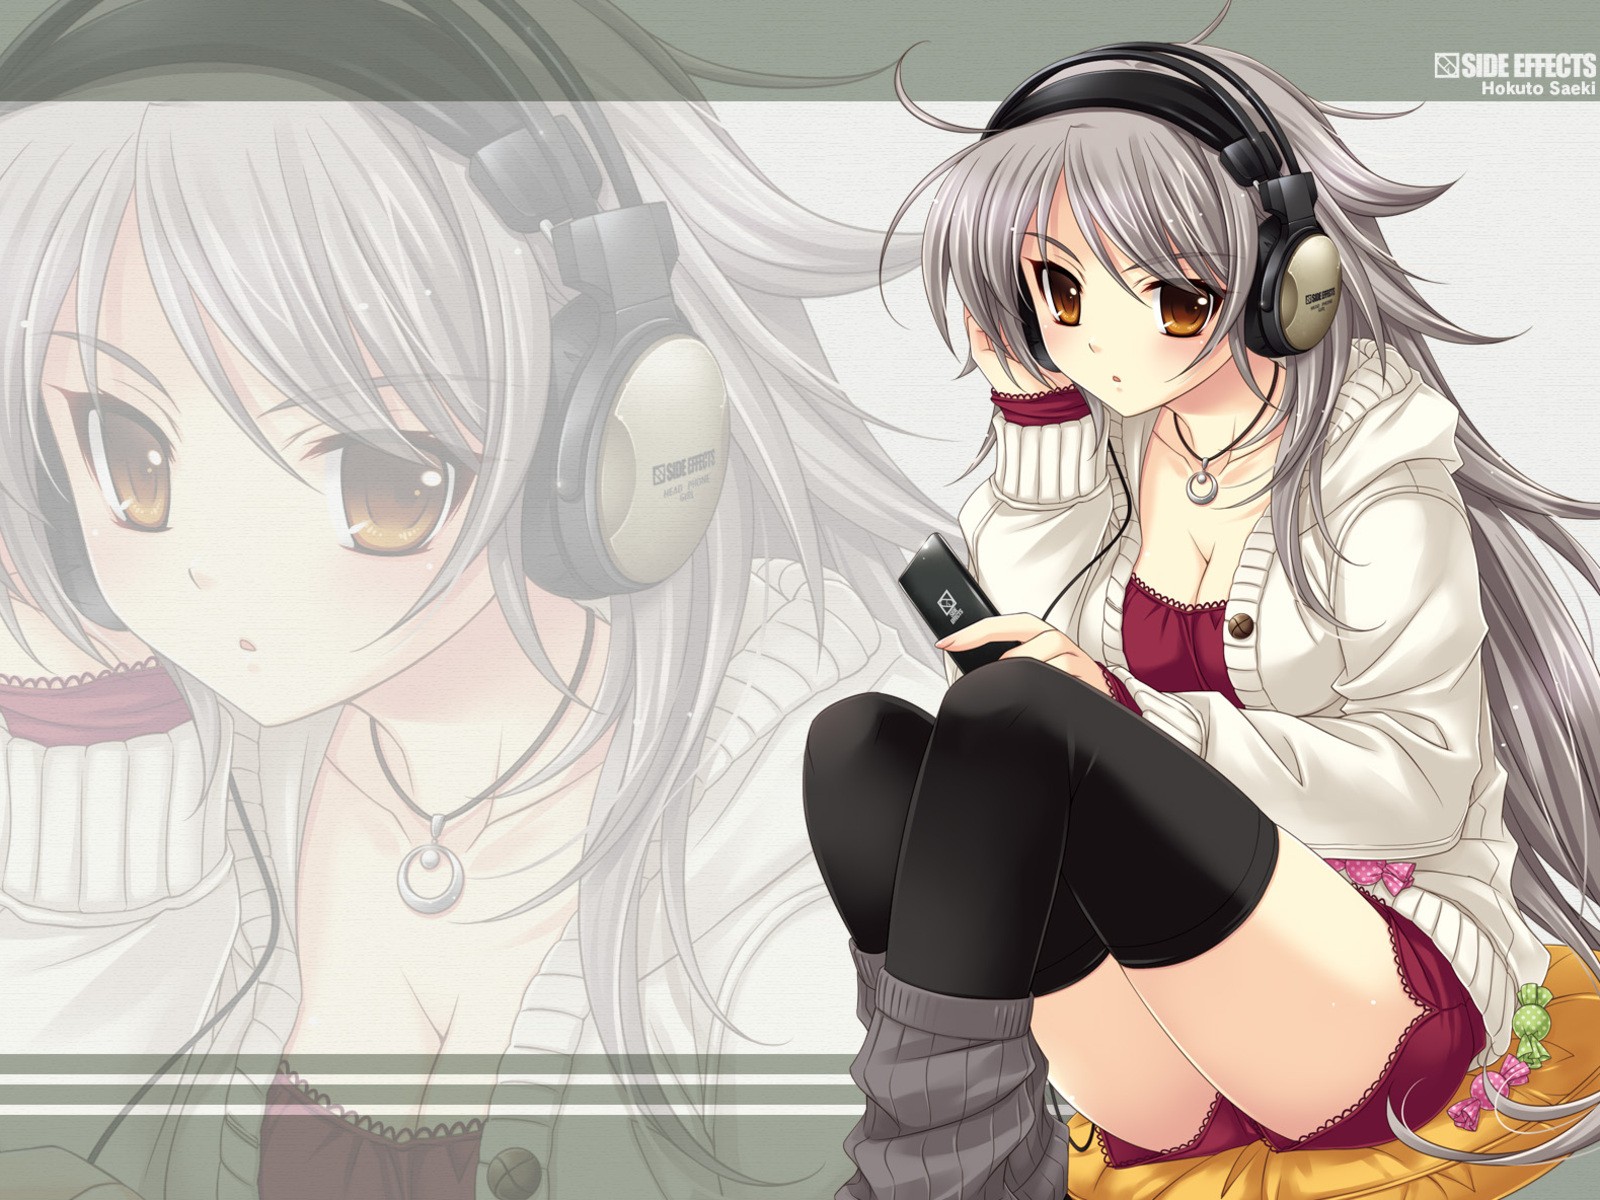 Anime girl wearing headphones and gazing into the distance.